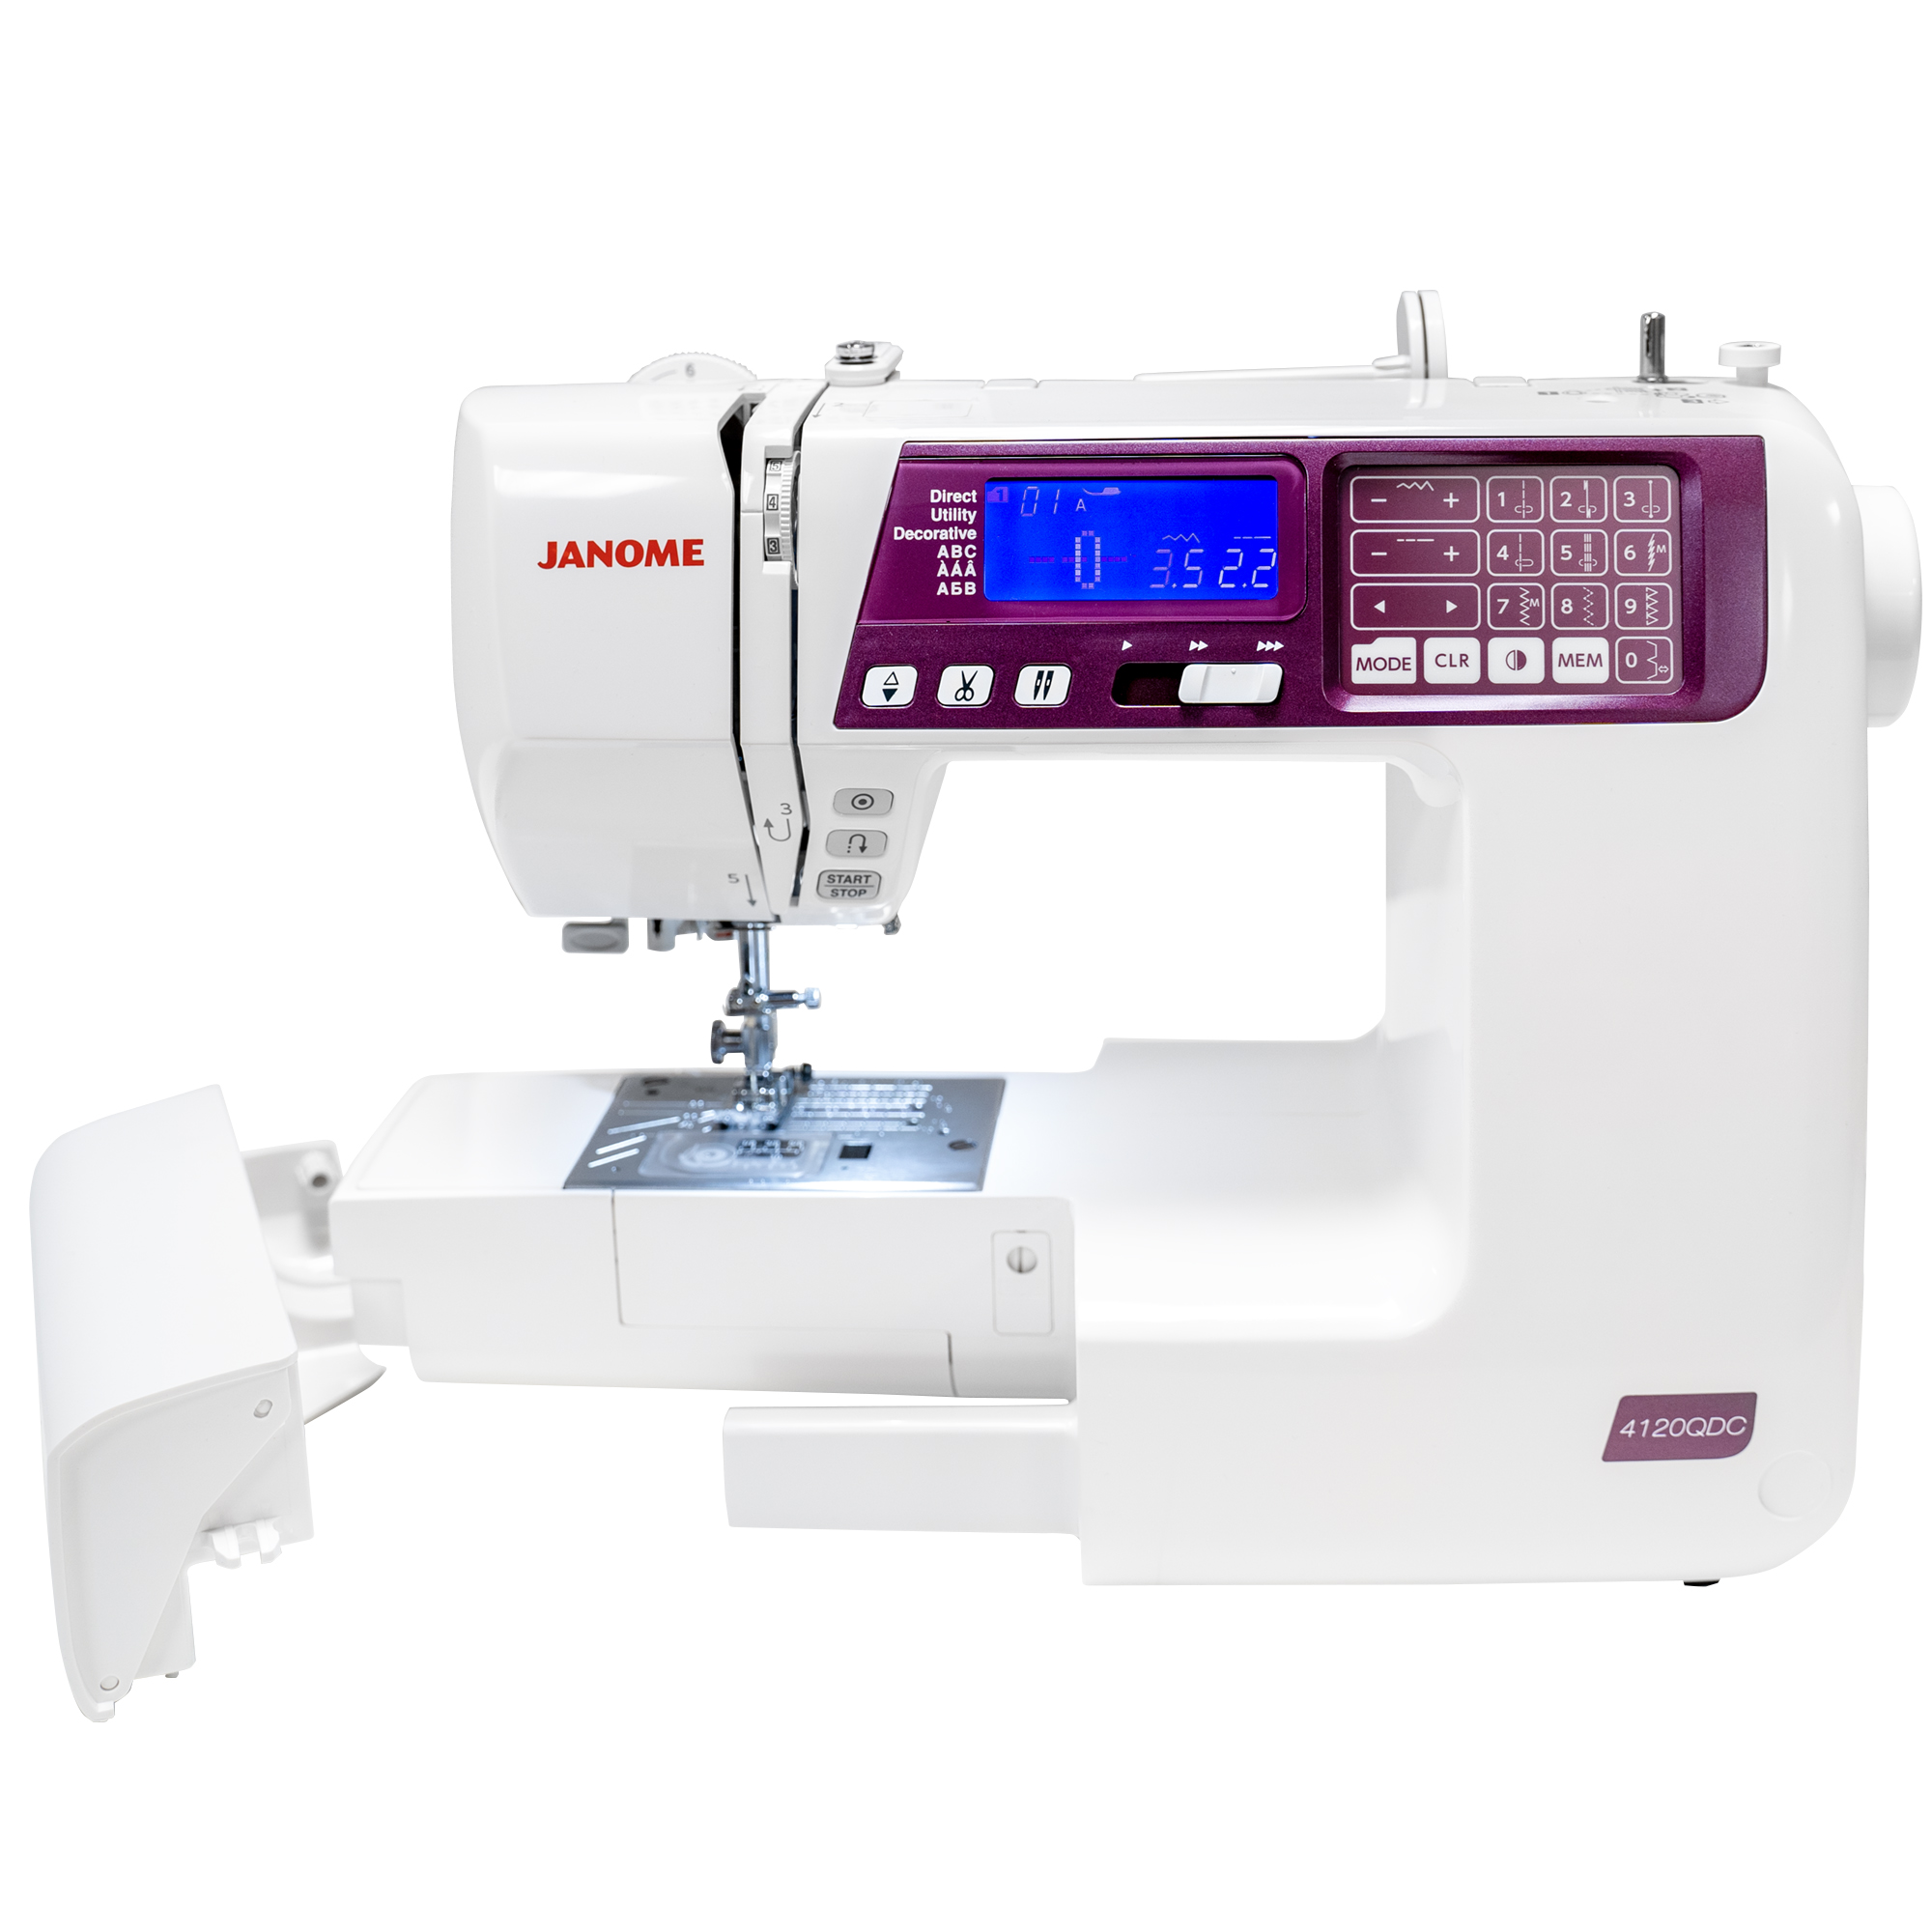 Janome 4120QDC-G  Rocky Mountain Sewing and Vacuum